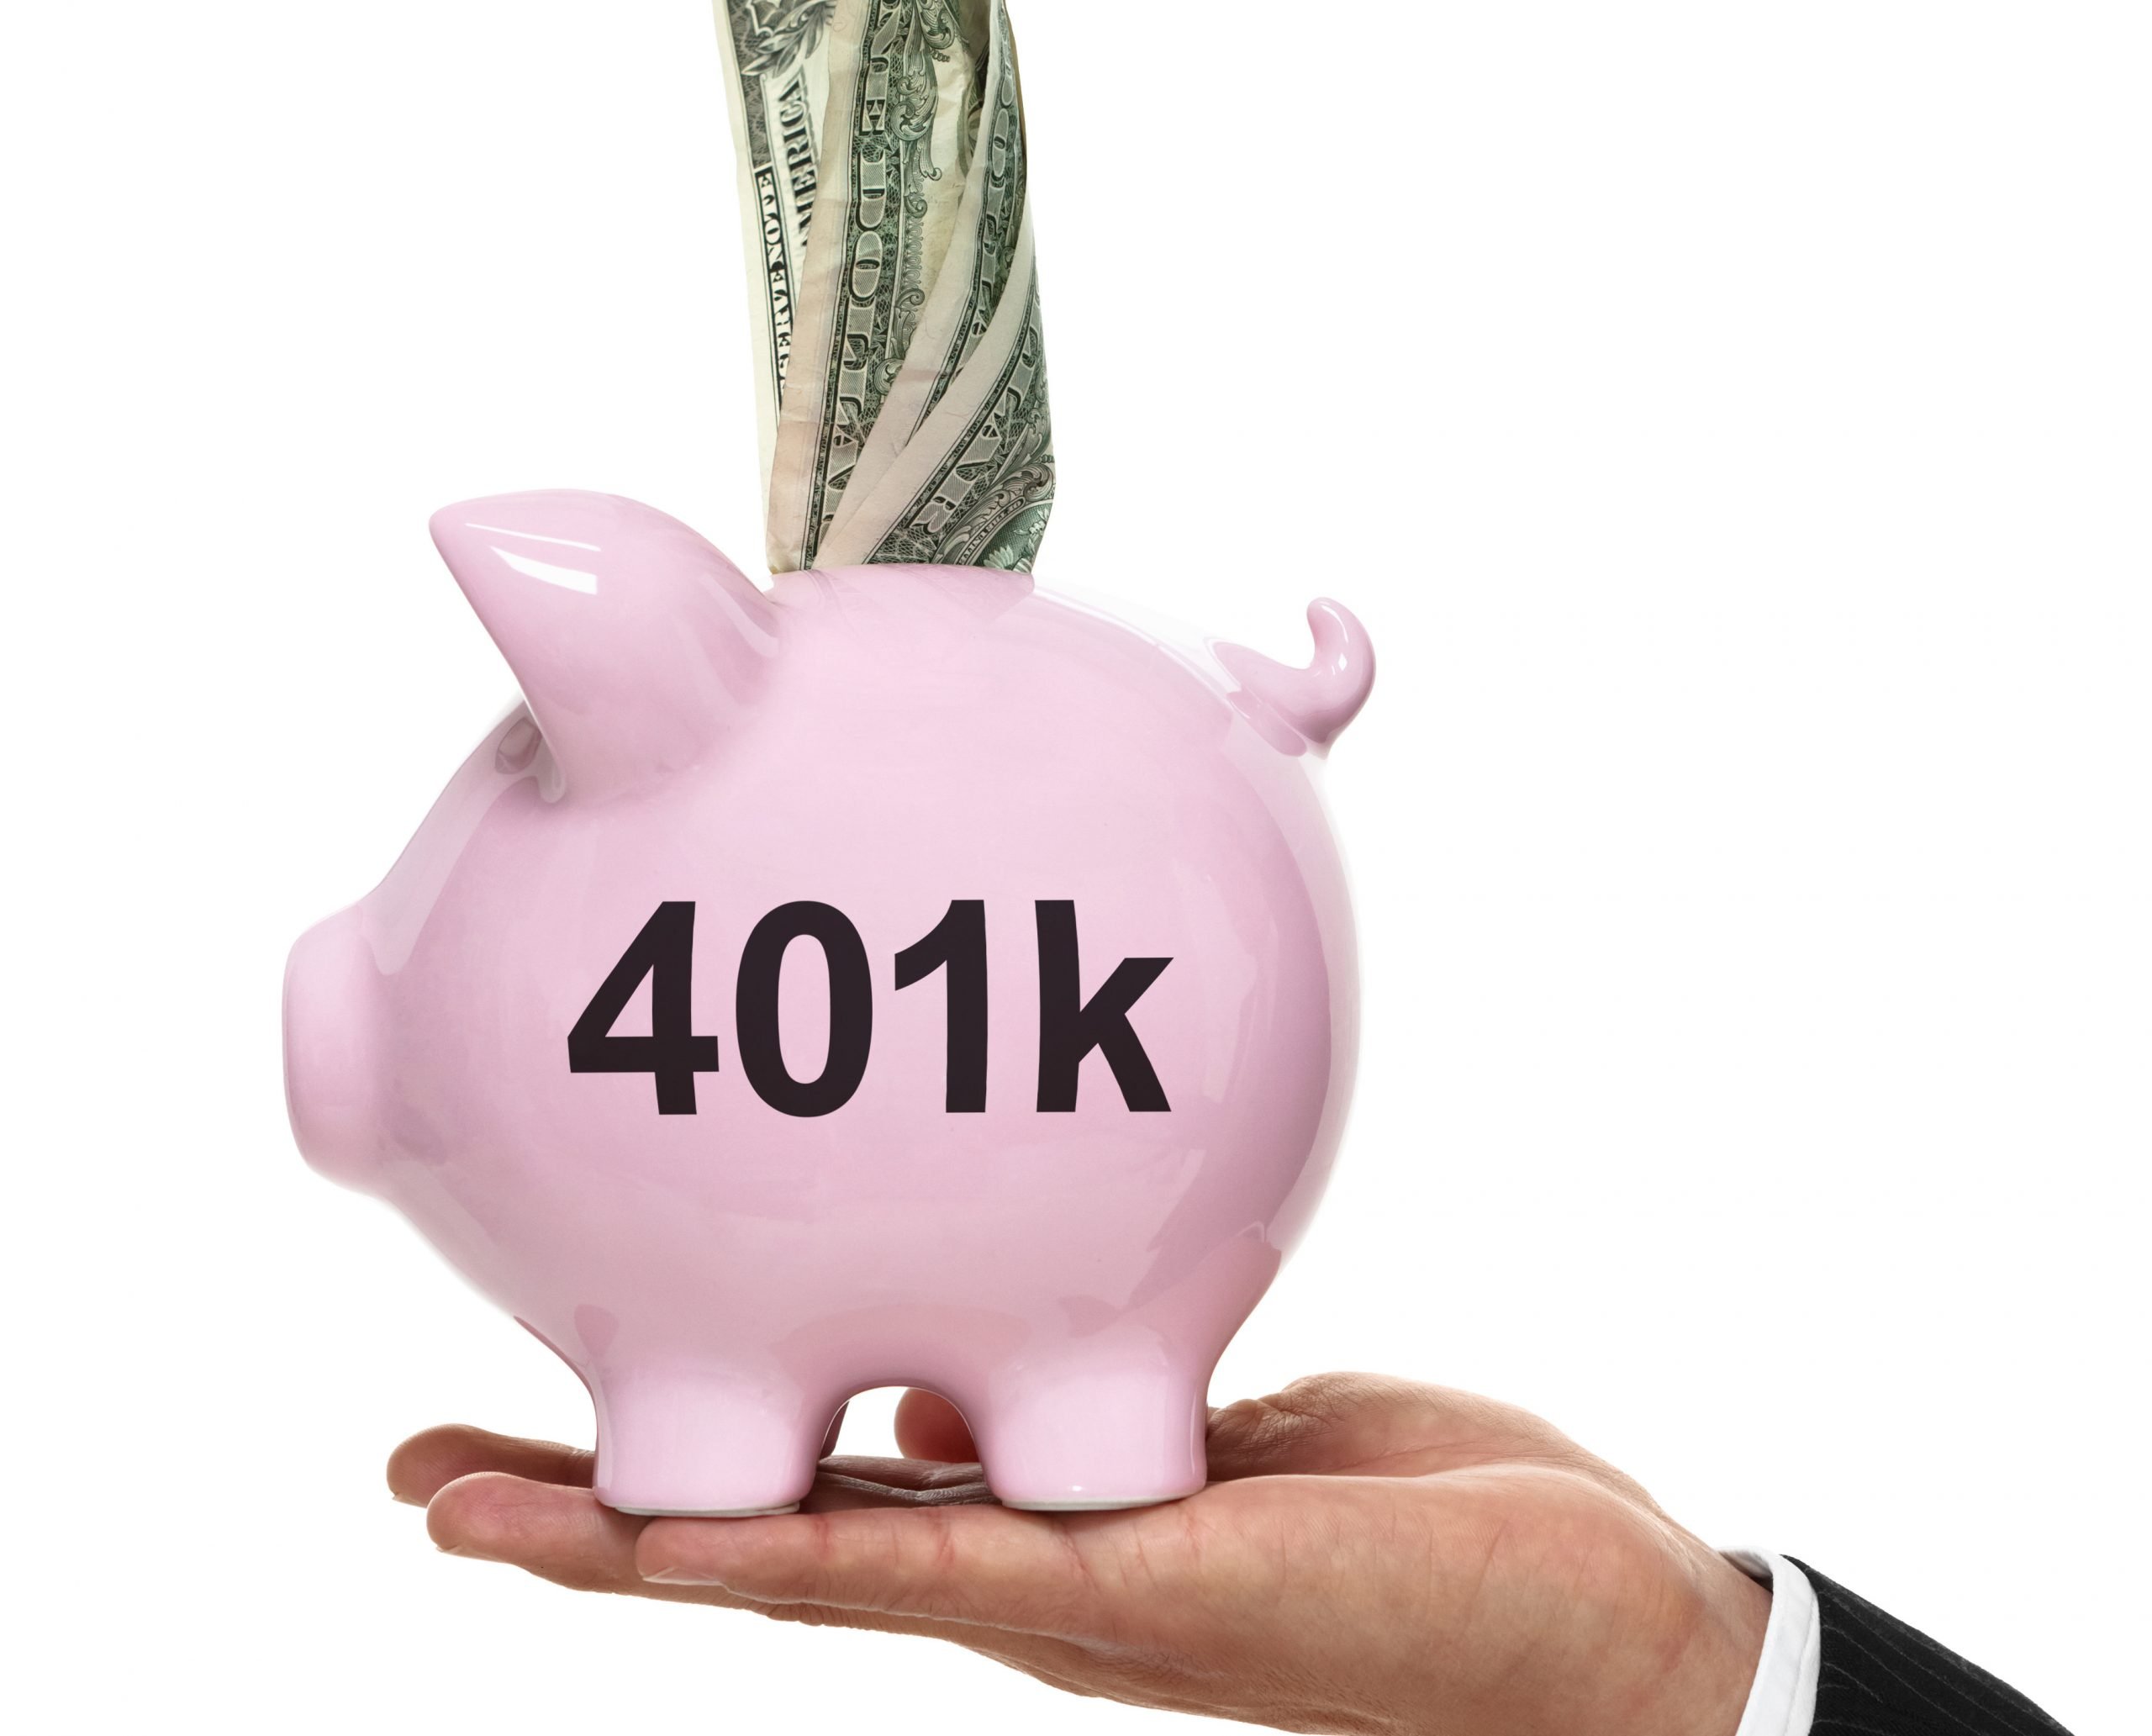 9 questions about 401(k)s you were too embarrassed to ask